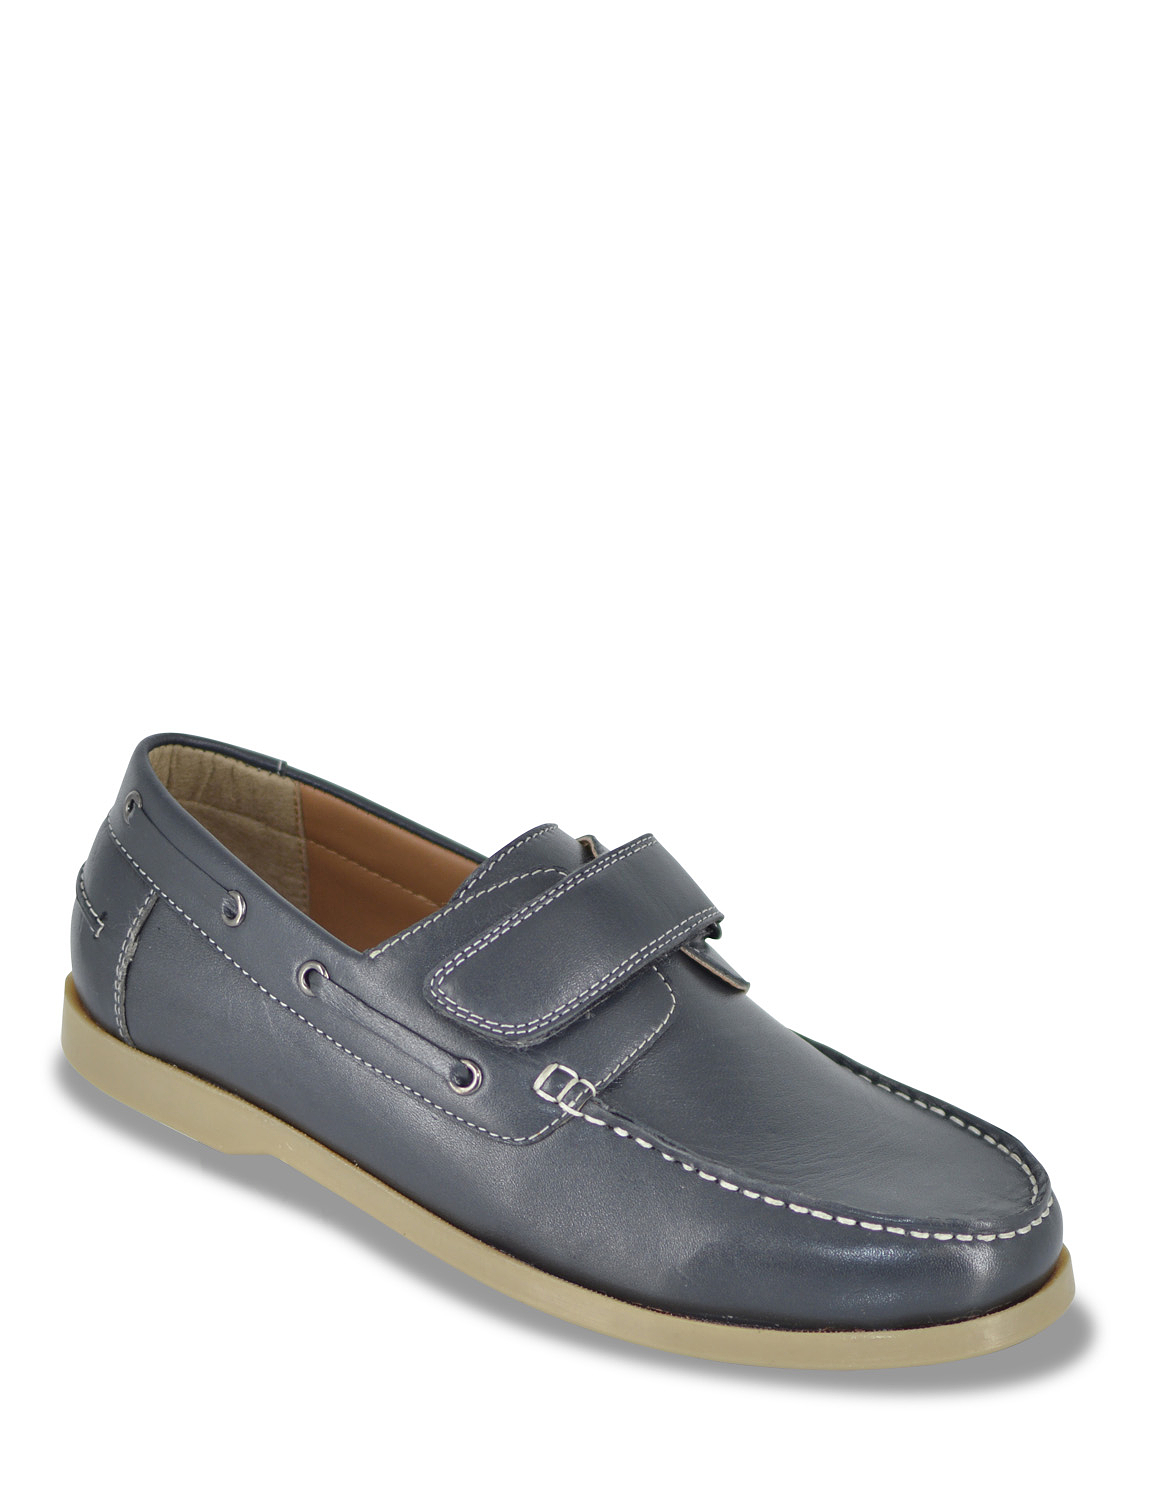 Pegasus Wide Fit Leather Touch Fasten Boat Shoe | Chums